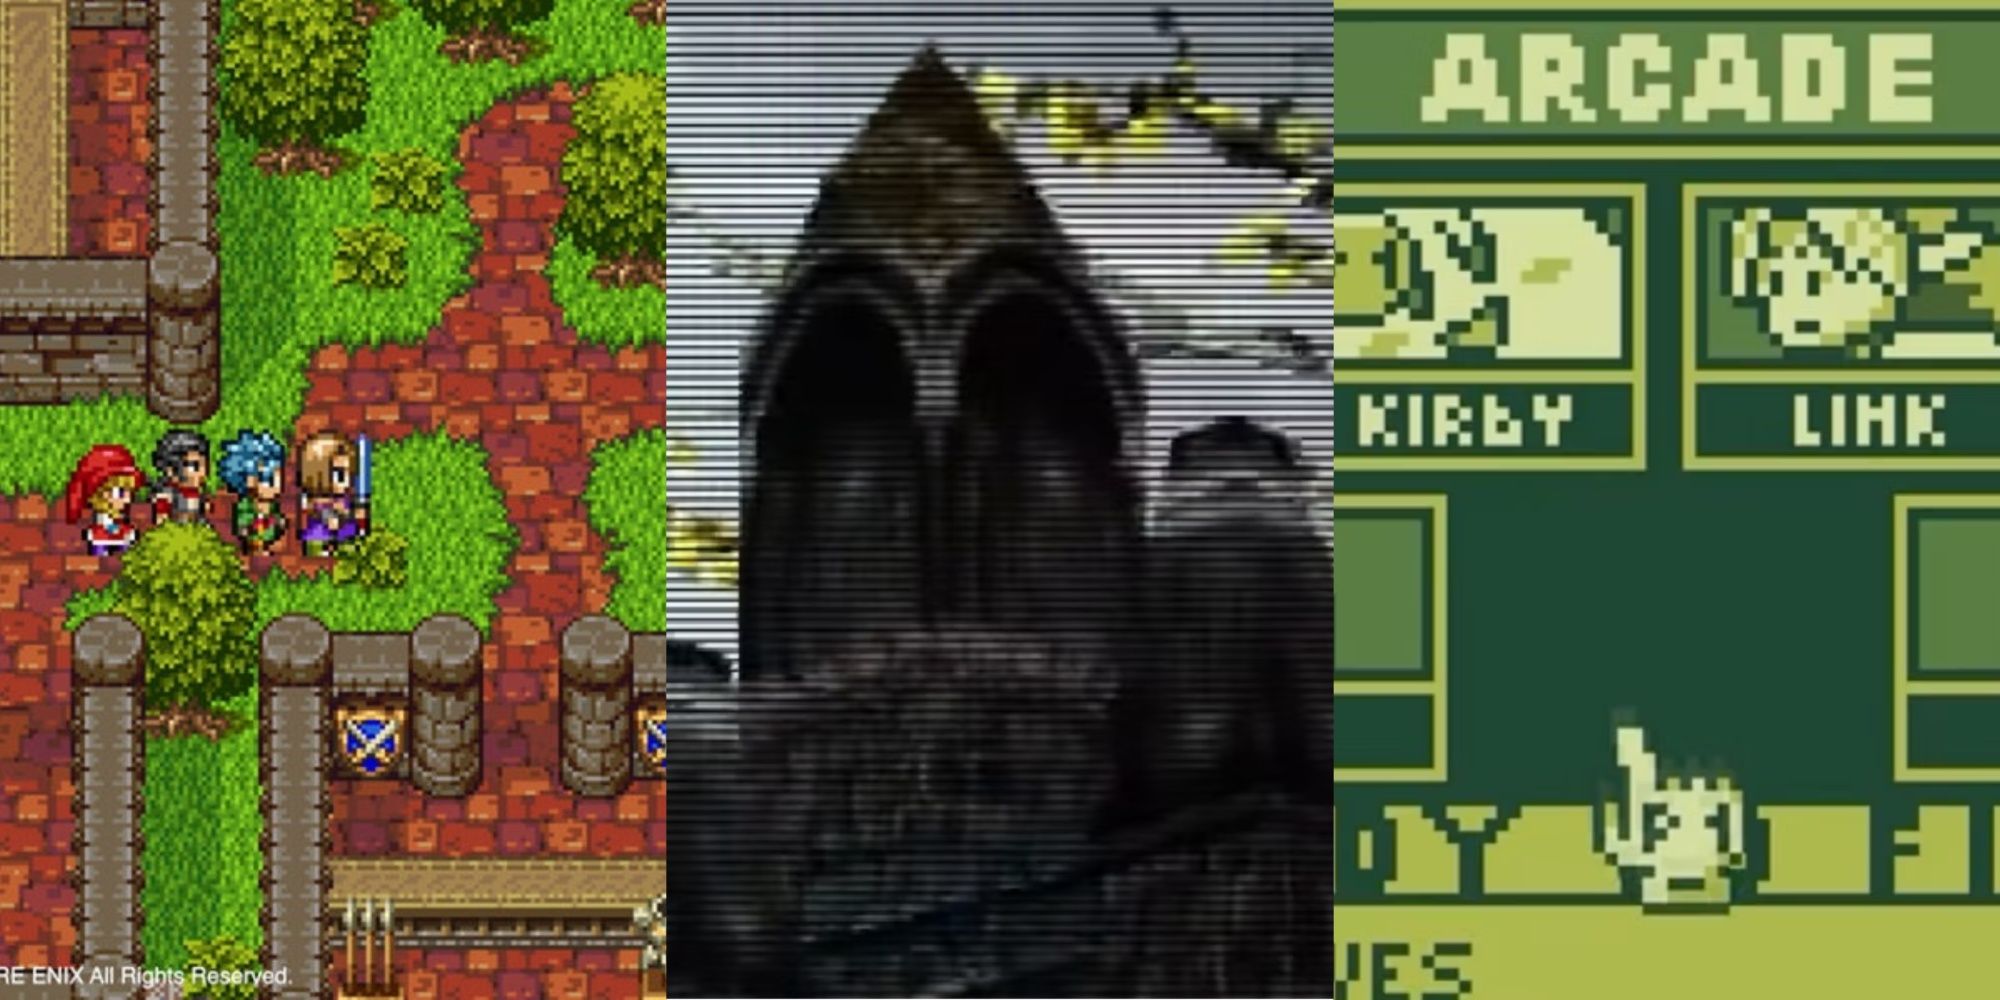 The party travelling through a 2D town in Dragon Quest 11, an overview of Bloodborne PSX, and the roster of Super Smash Land